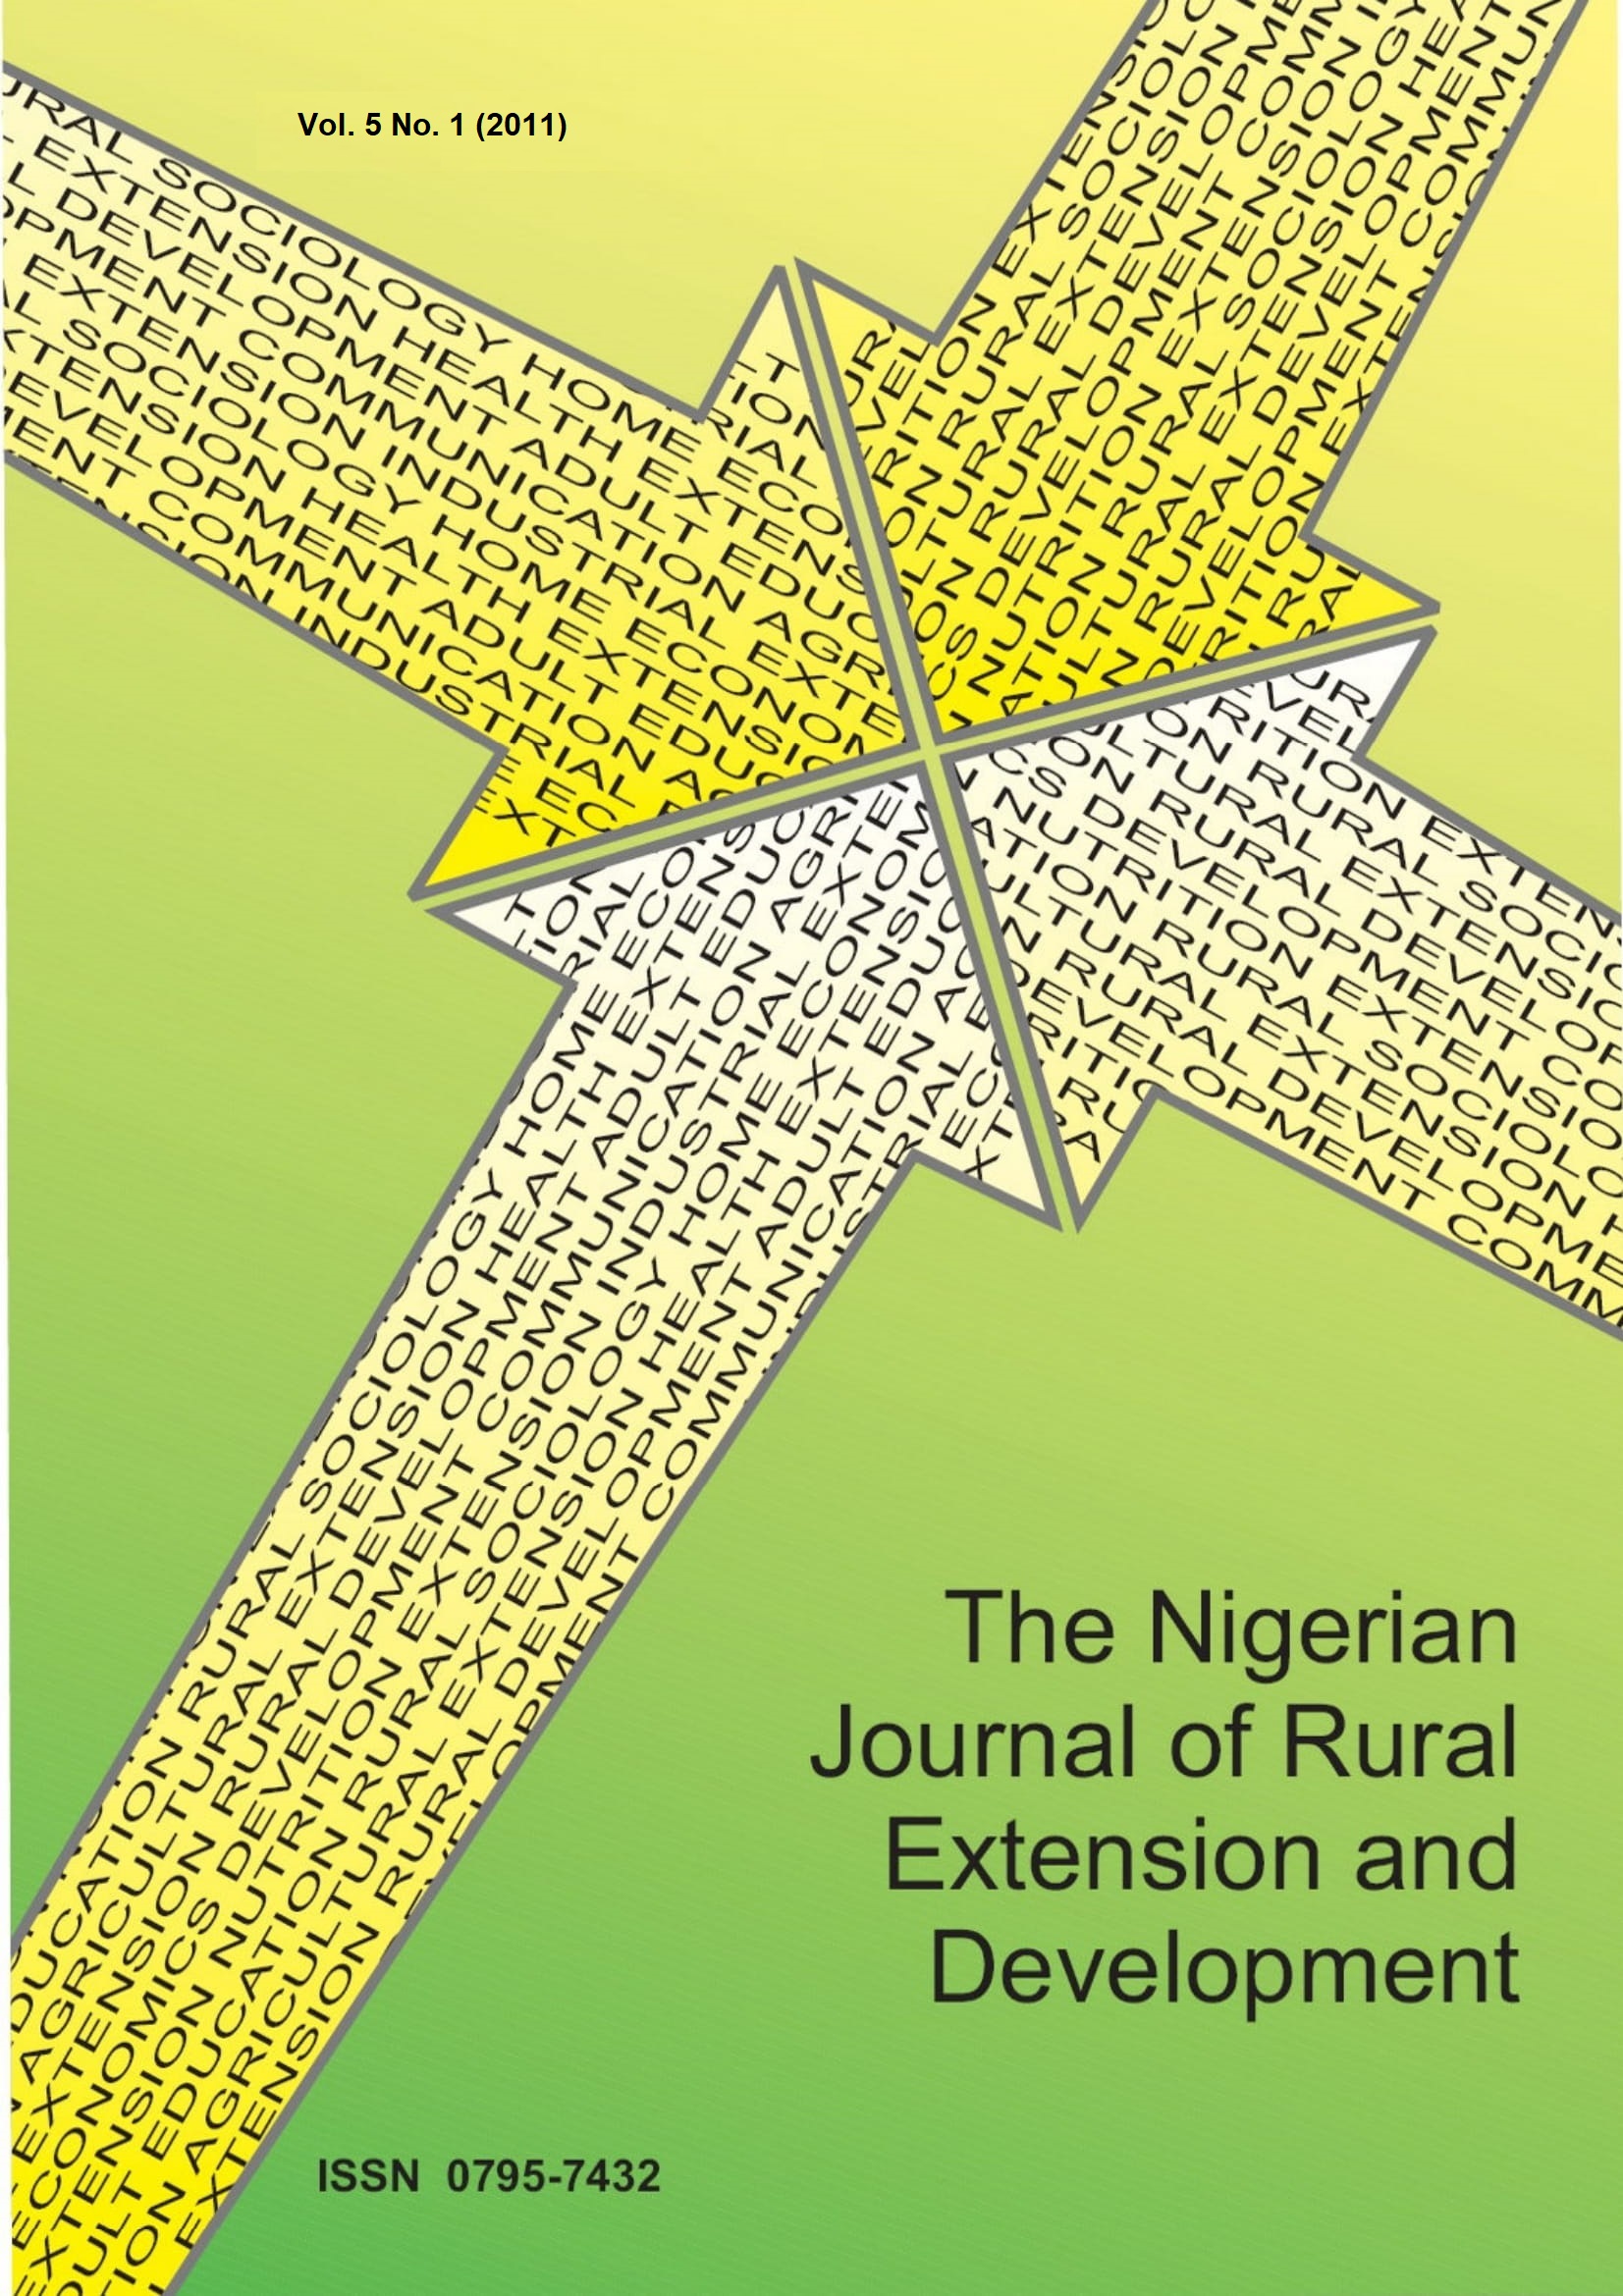 					View Vol. 5 No. 1 (2011):  The Nigerian Journal of Rural Extension and Development (NJRED)
				